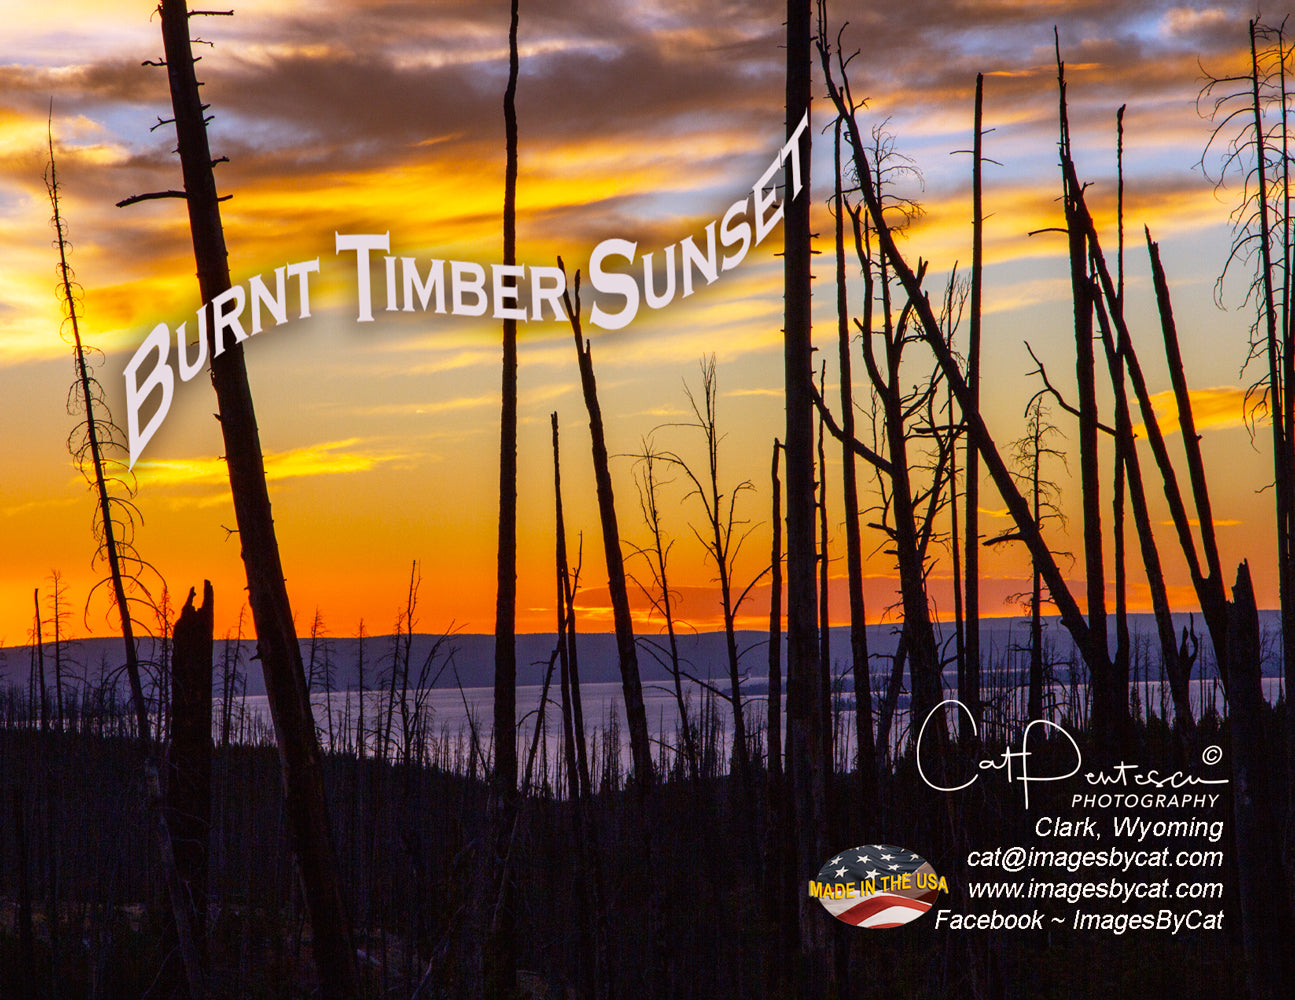 Note Cards - BURNT TIMBER SUNSET